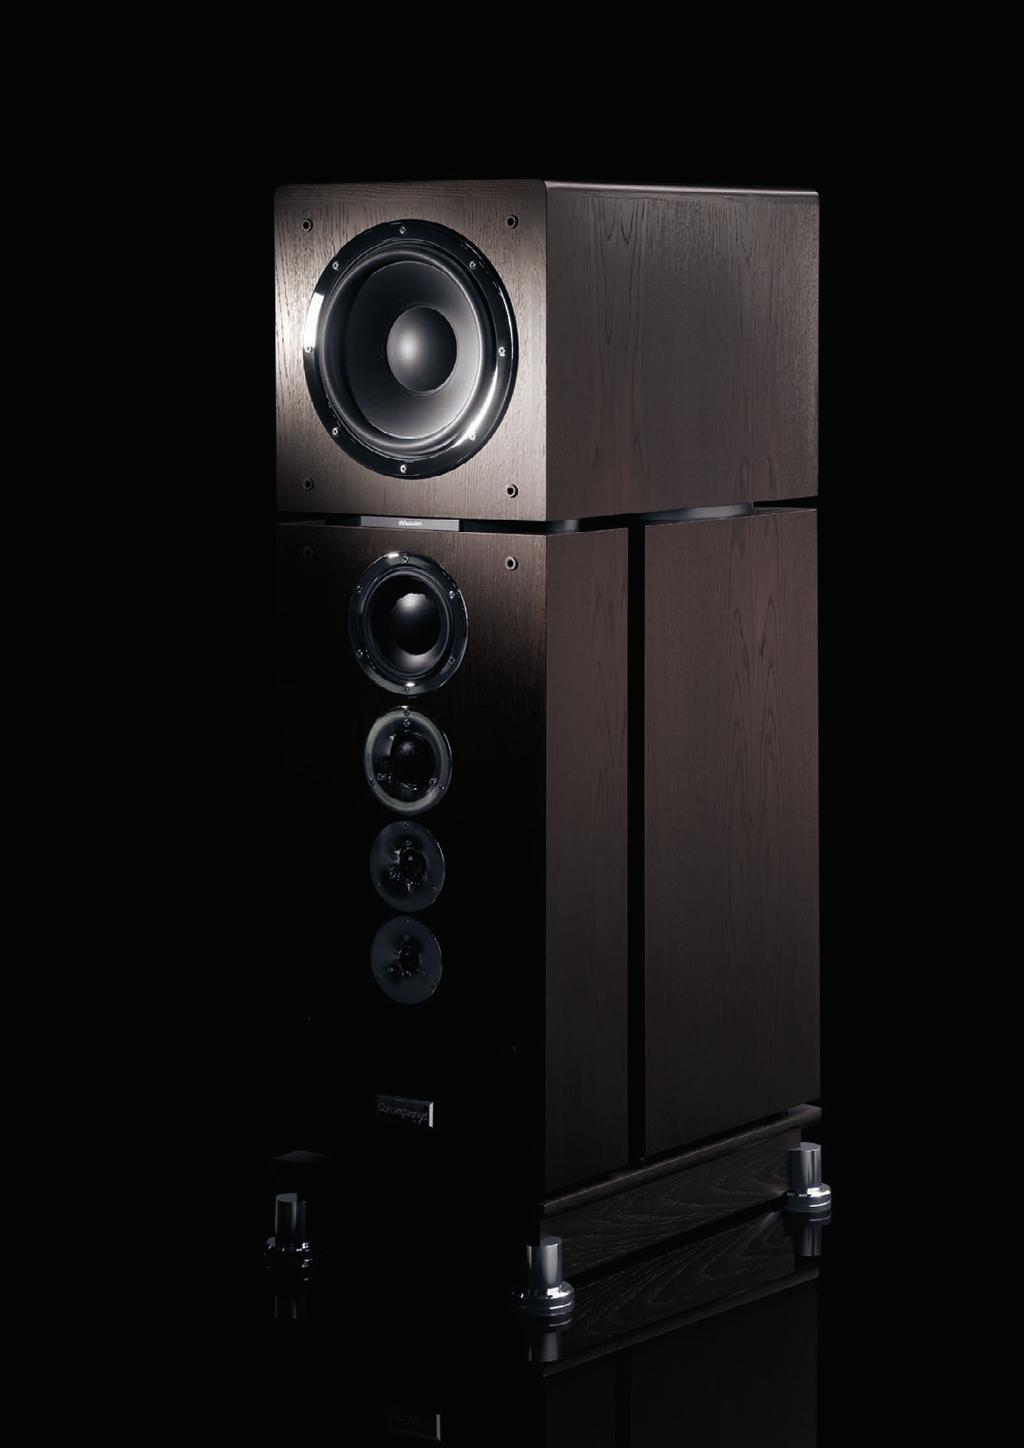 Such an inimitable loudspeaker can only come from an authentic loudspeaker specialist: The Consequence Ultimate Edition by Dynaudio.